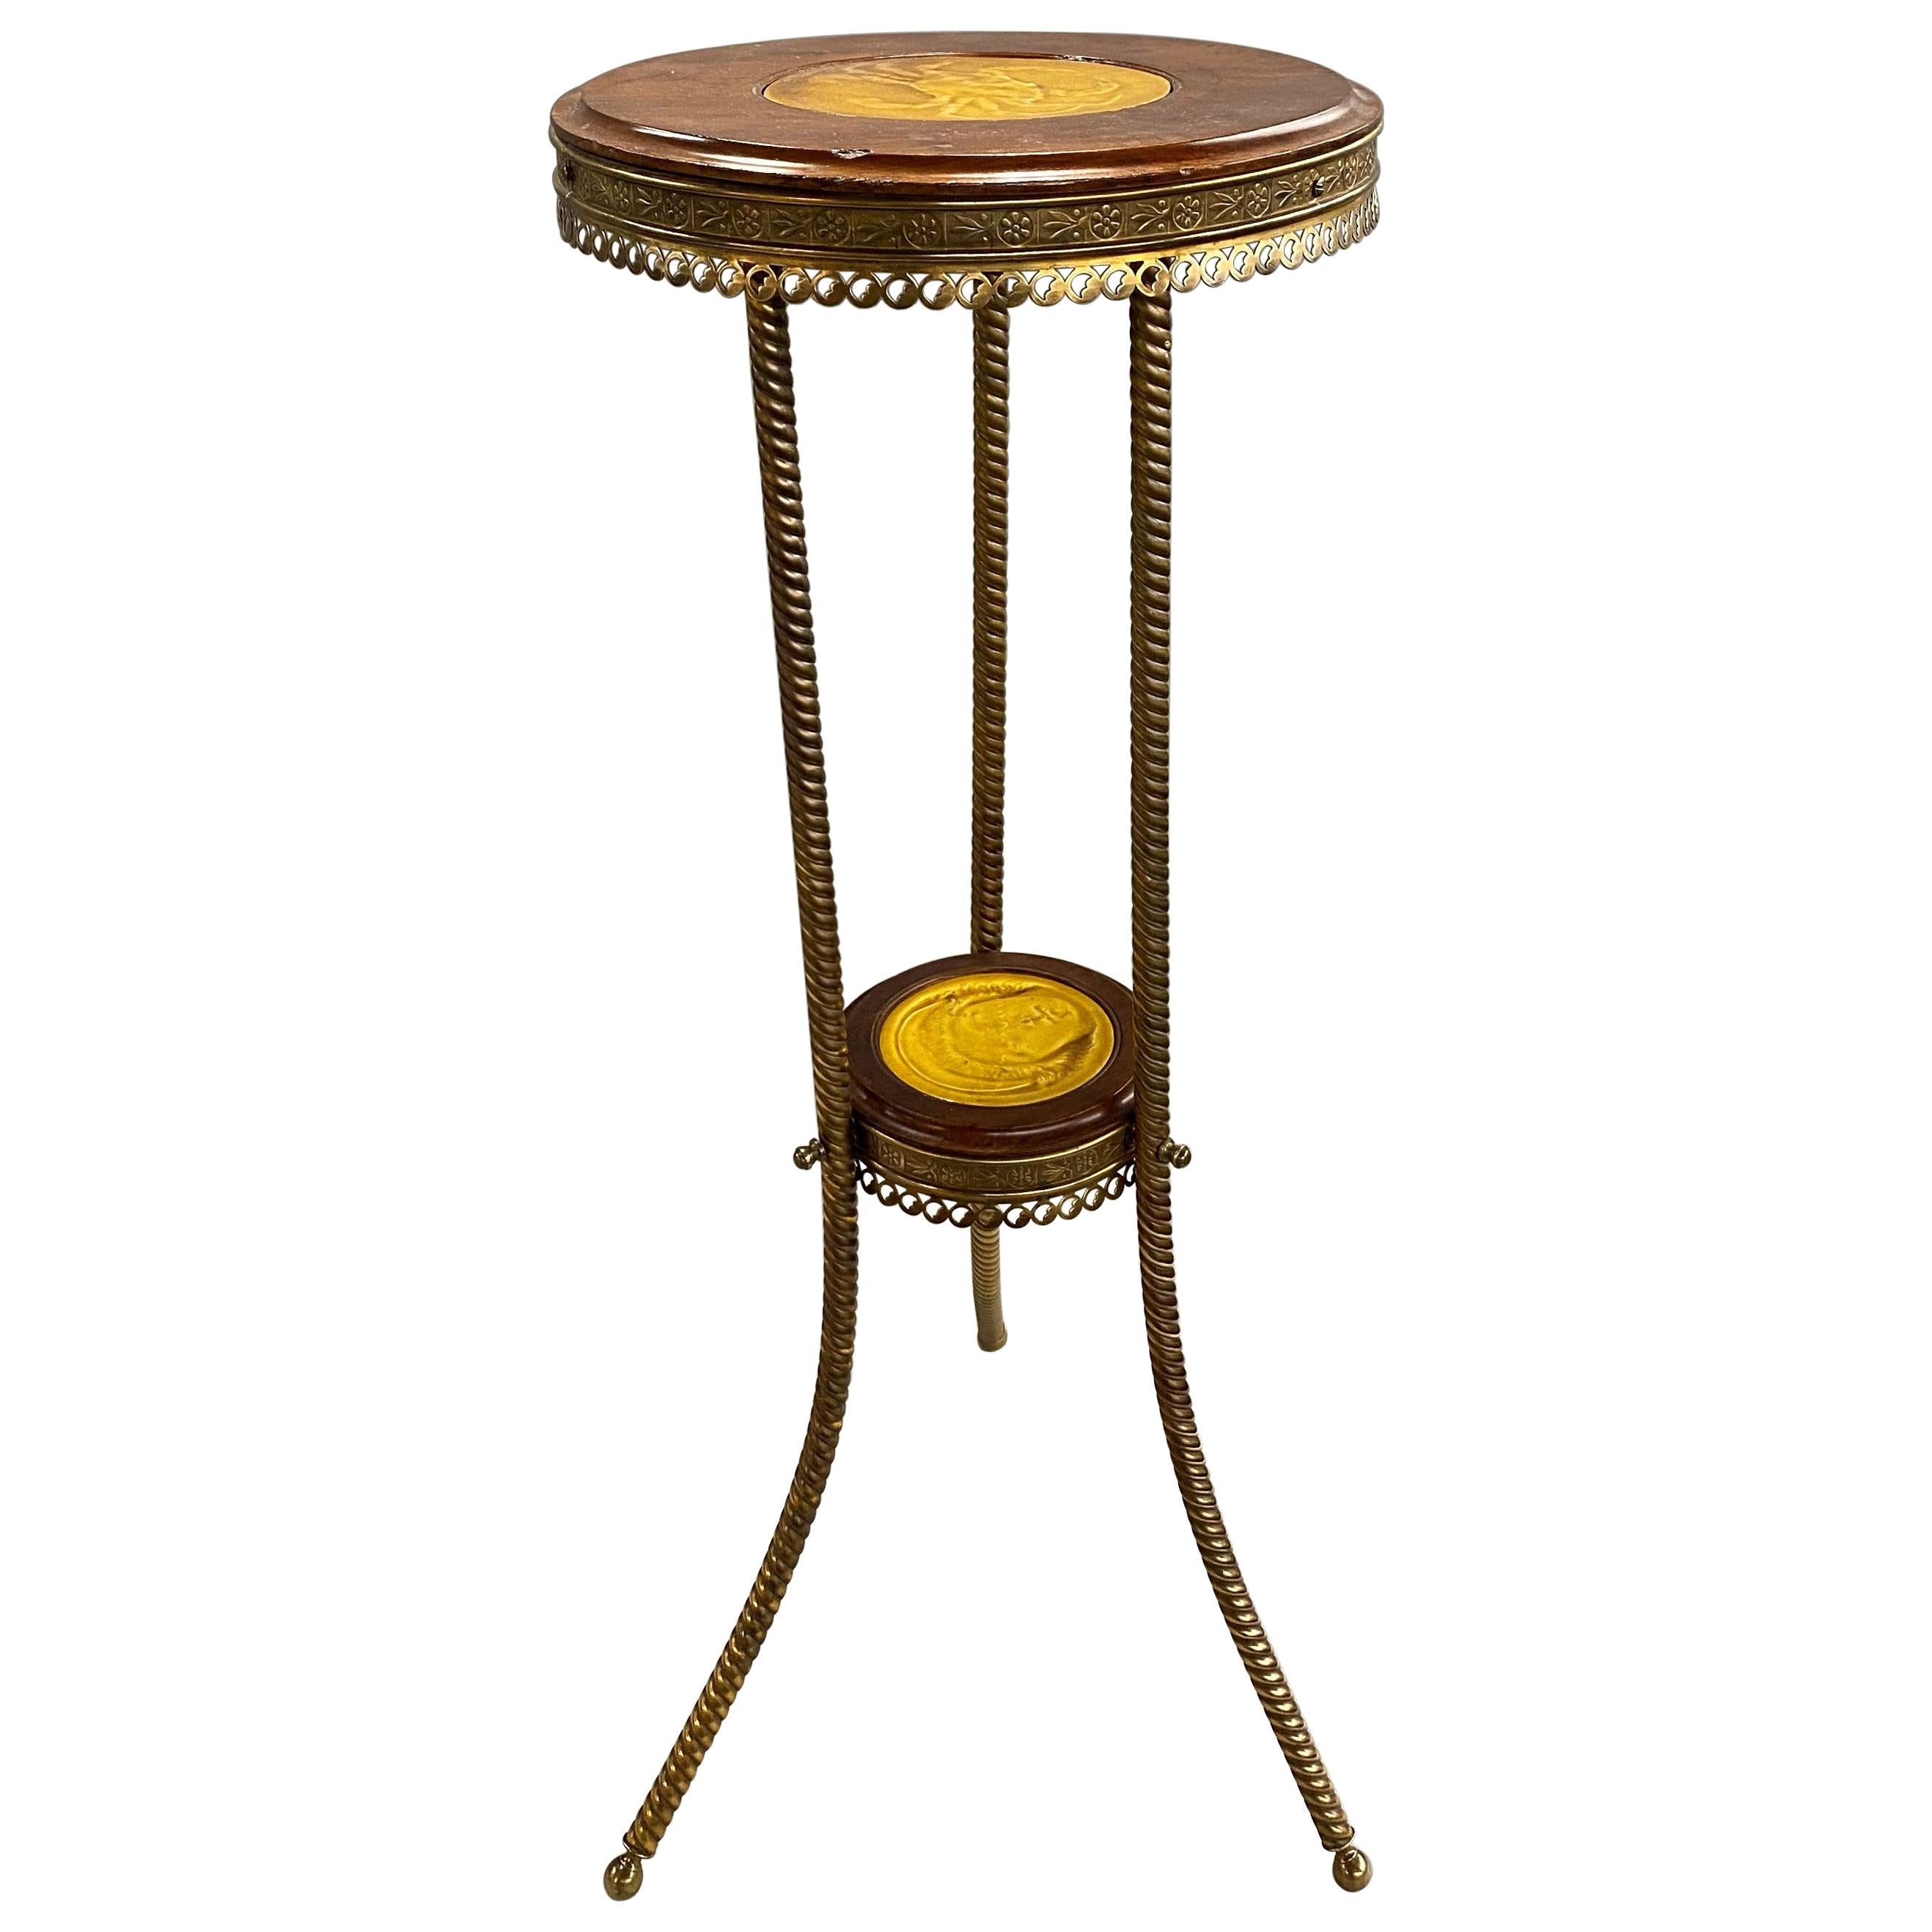 J. & J.G. Low Chelsea Tile Wooden and Brass Pedestal or Tripod Stand, circa 1884